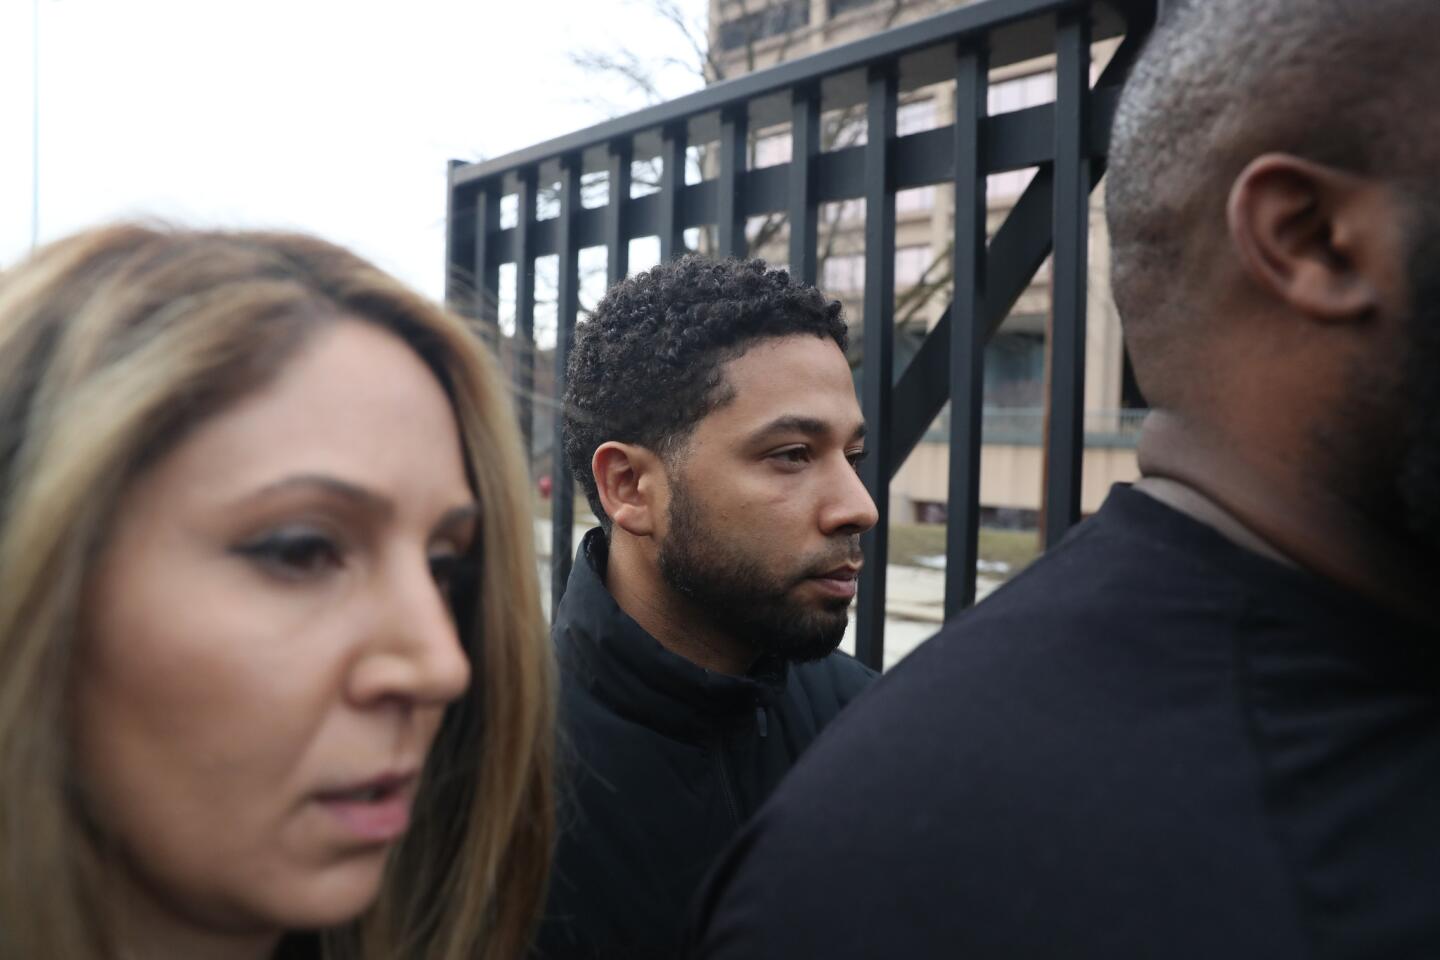 After bonding out, "Empire" actor Jussie Smollett leaves the Cook County Jail in Chicago, Feb. 21, 2019.